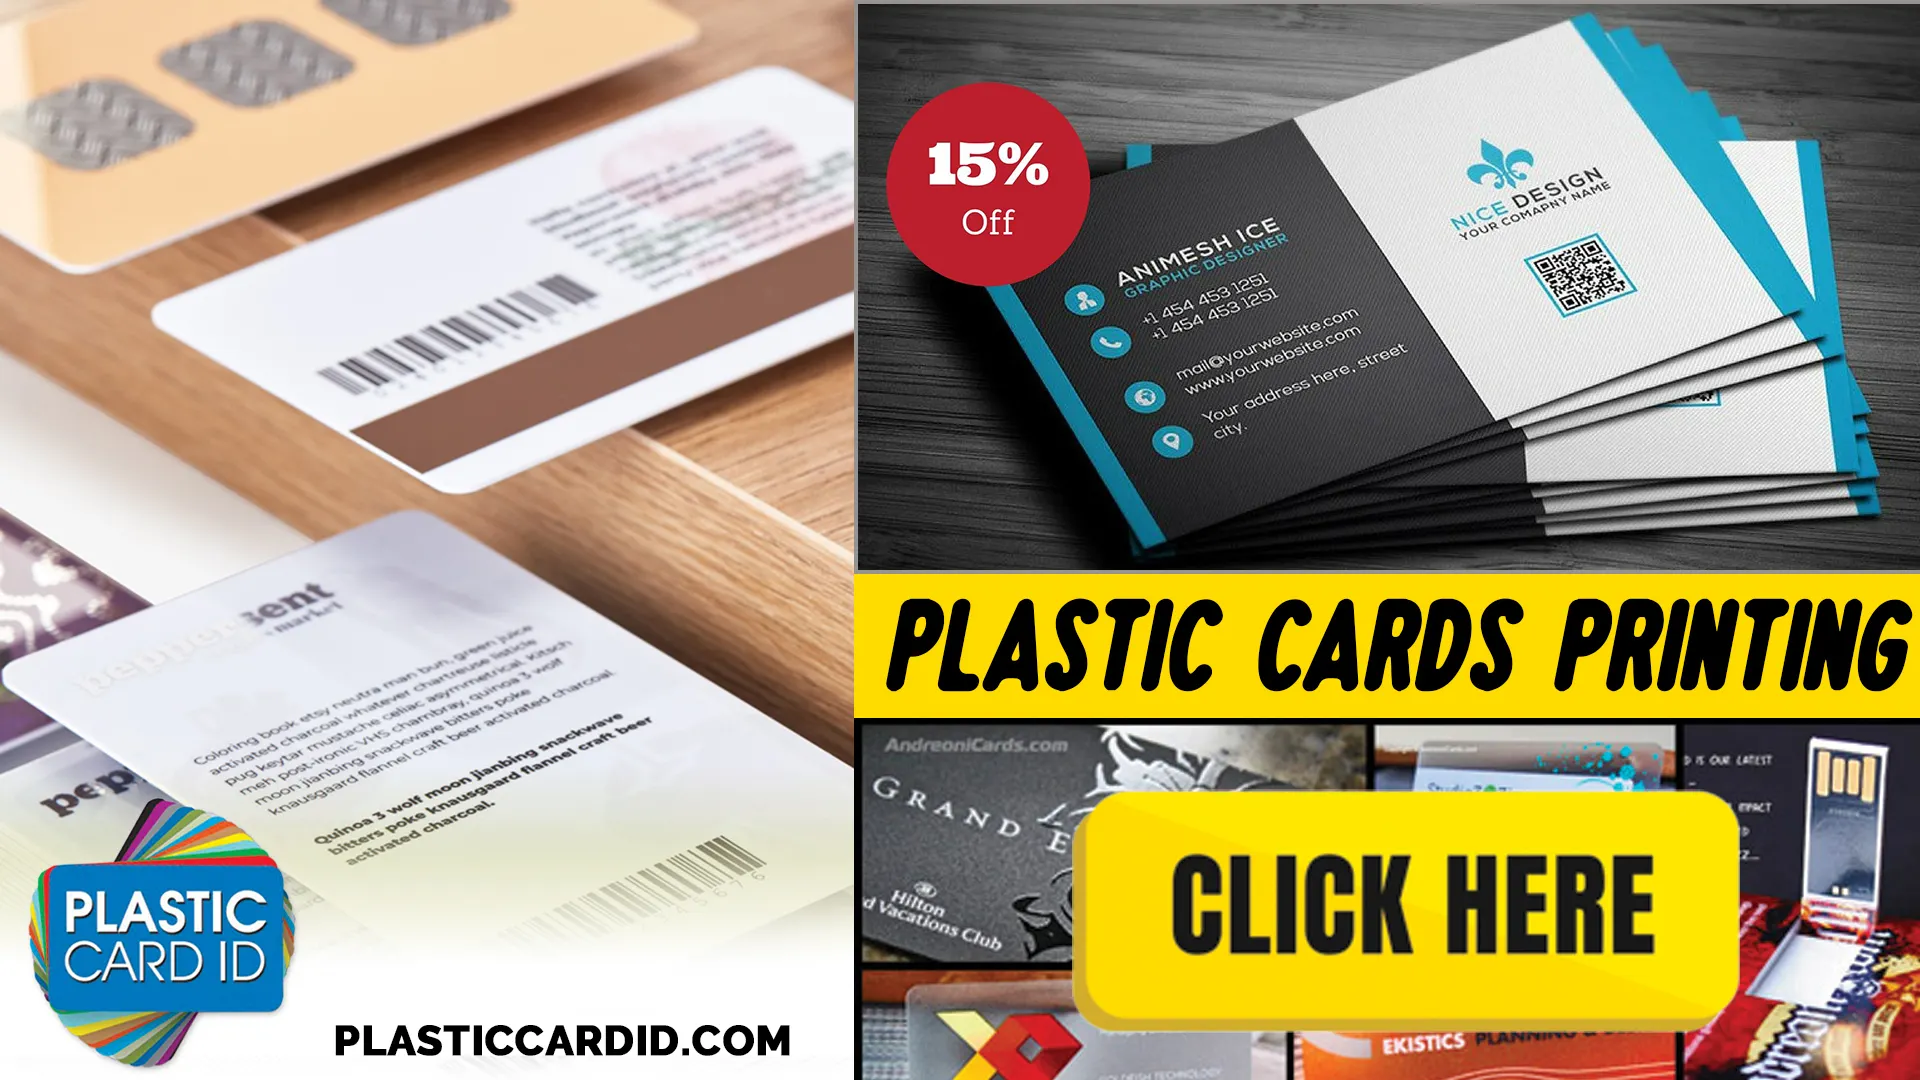 Welcome to the World of Durable and Perceptibly Premium Cards from Plastic Card ID




